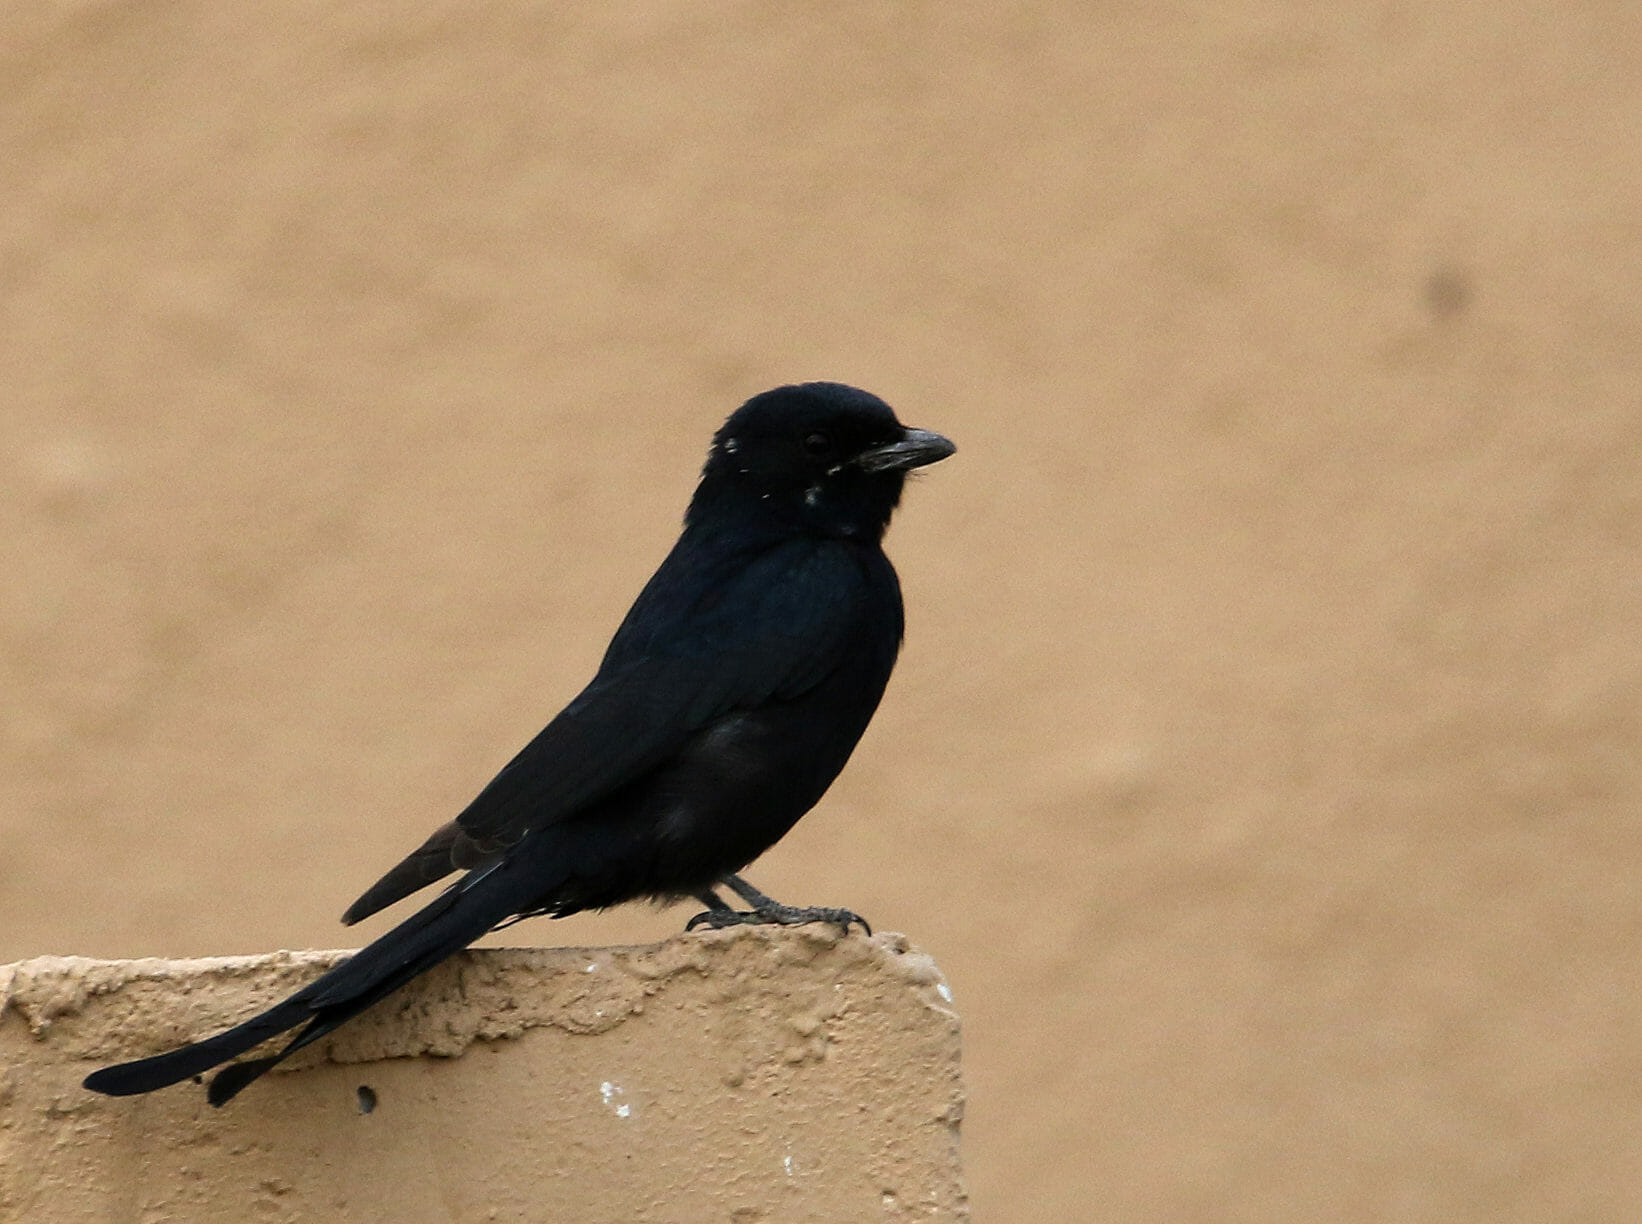 Black Drongo perched on a rock